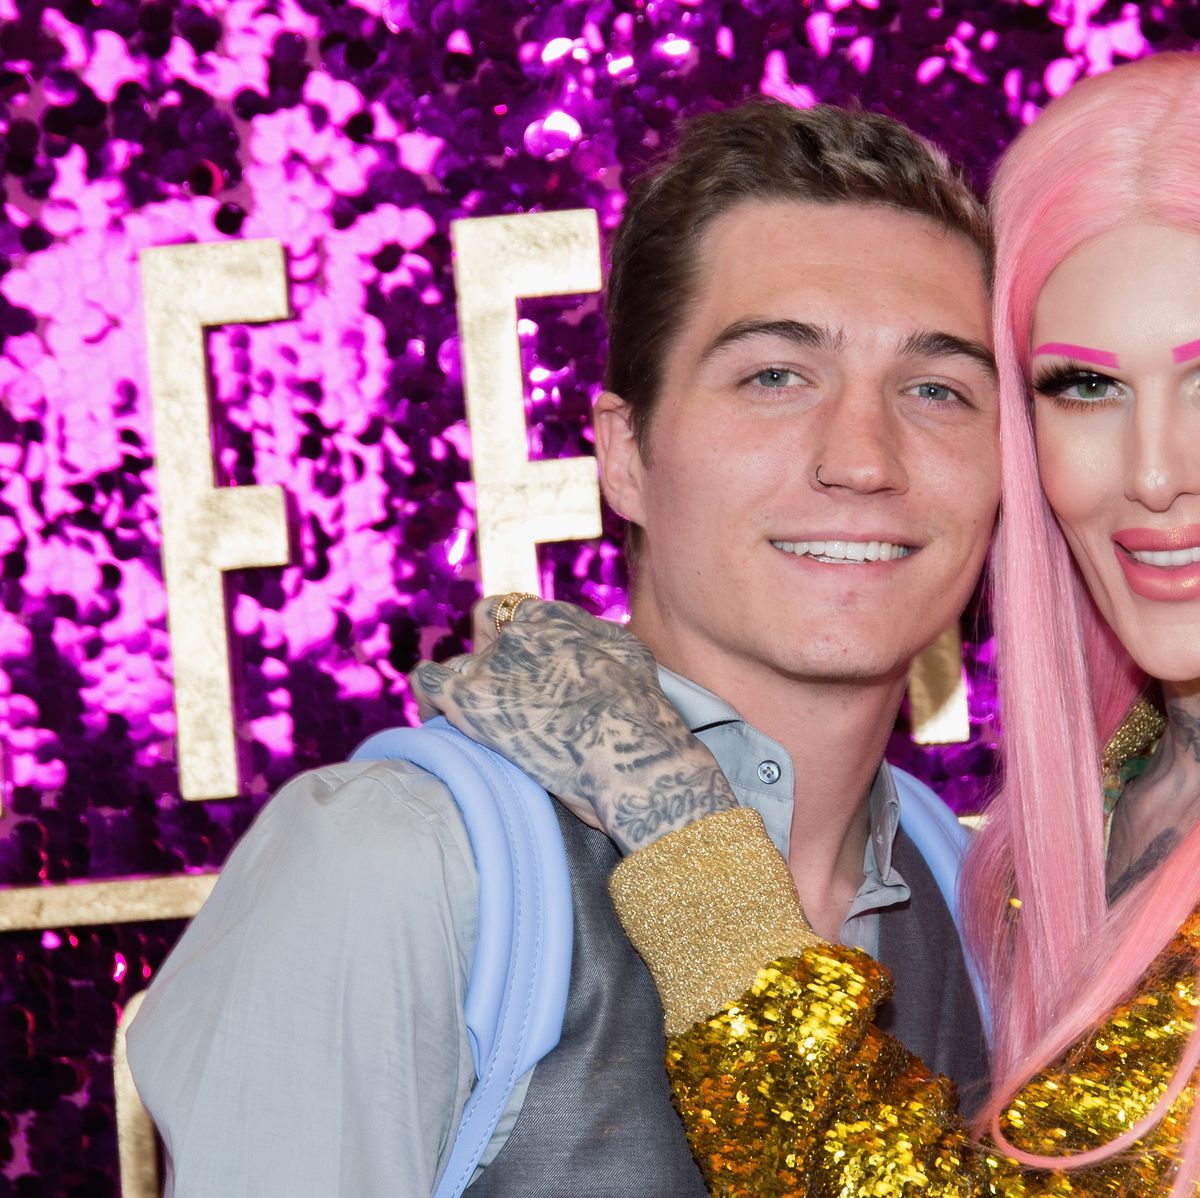 Jeffree Star spent his first Valentine's Day since his breakup